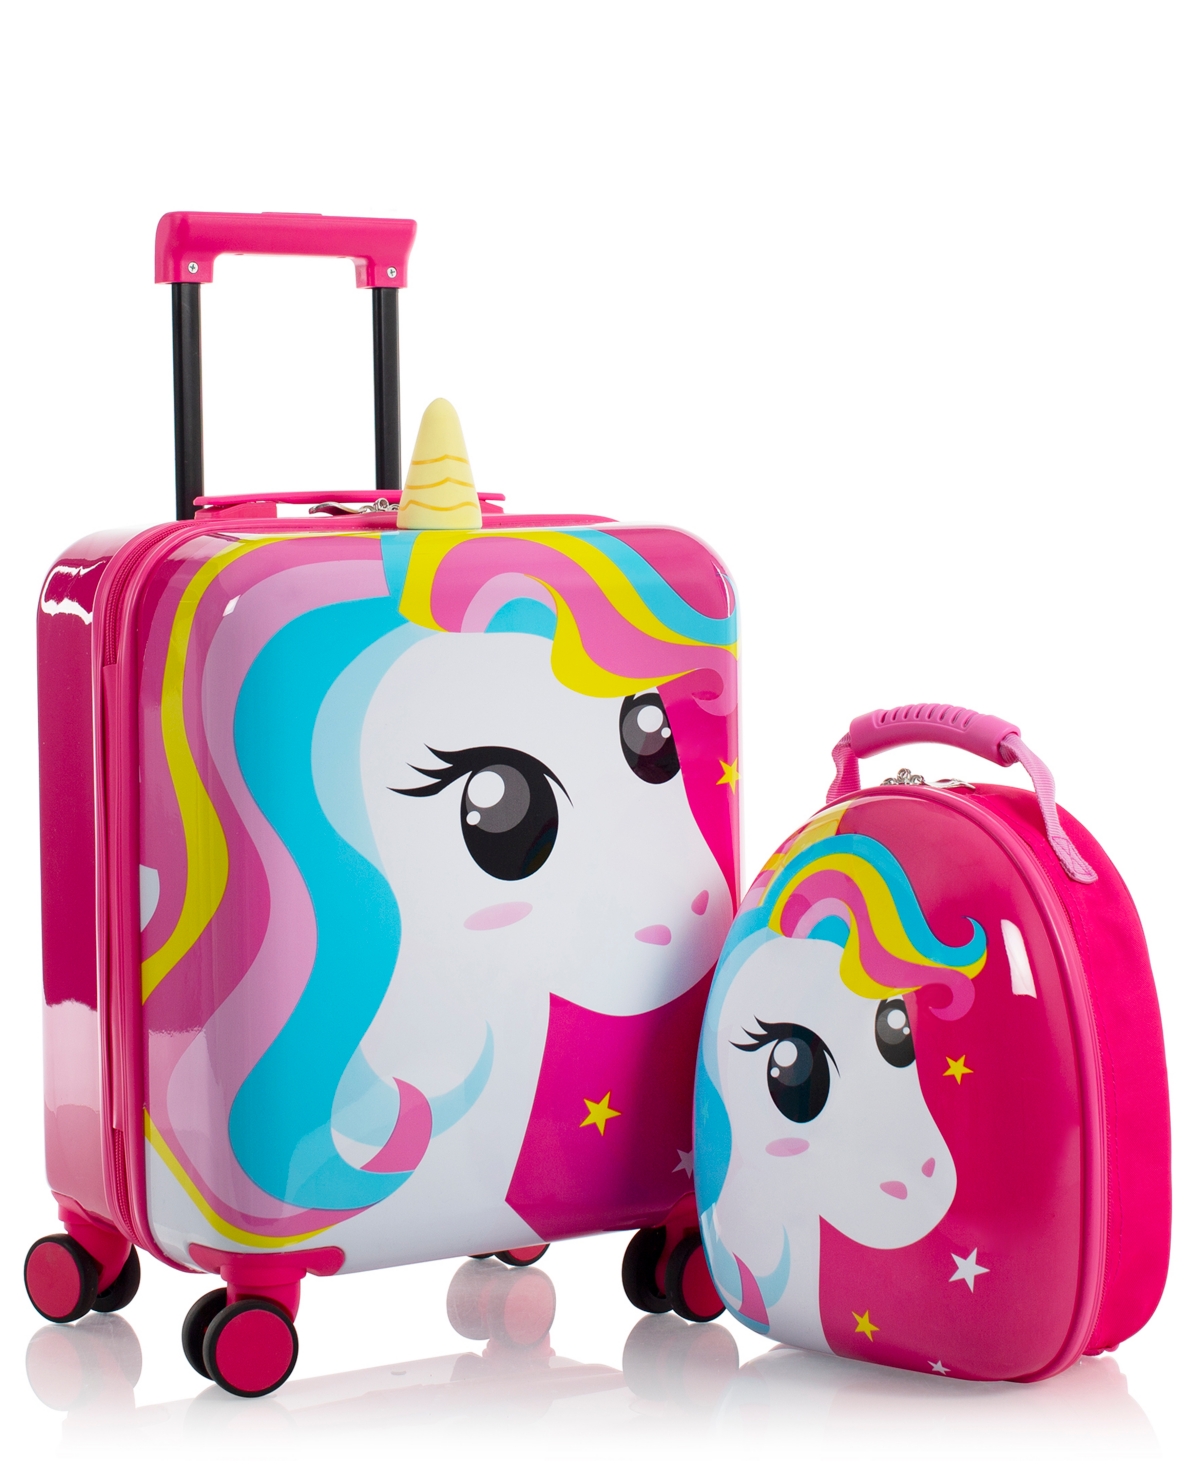 Hey's Super Tots Spinner Luggage and Backpack - Unicorn